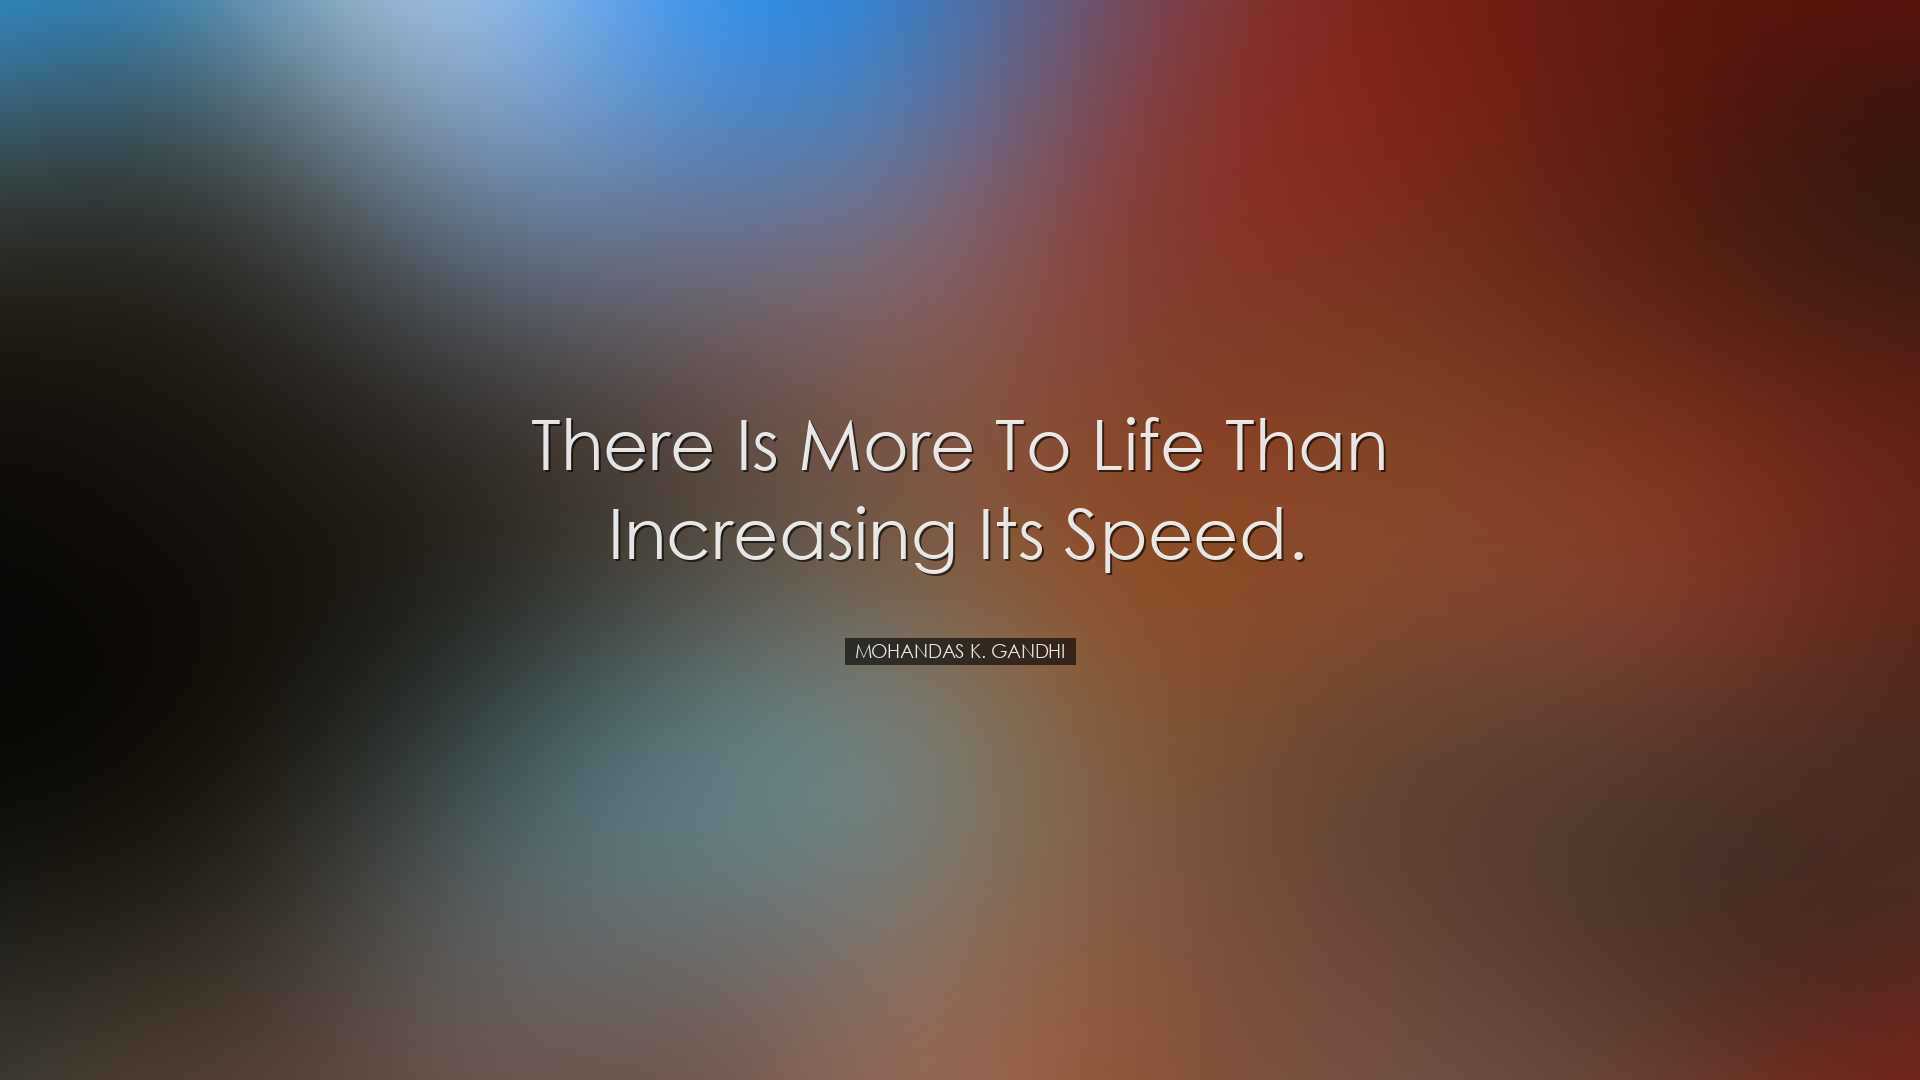 There is more to life than increasing its speed. - Mohandas K. Gan